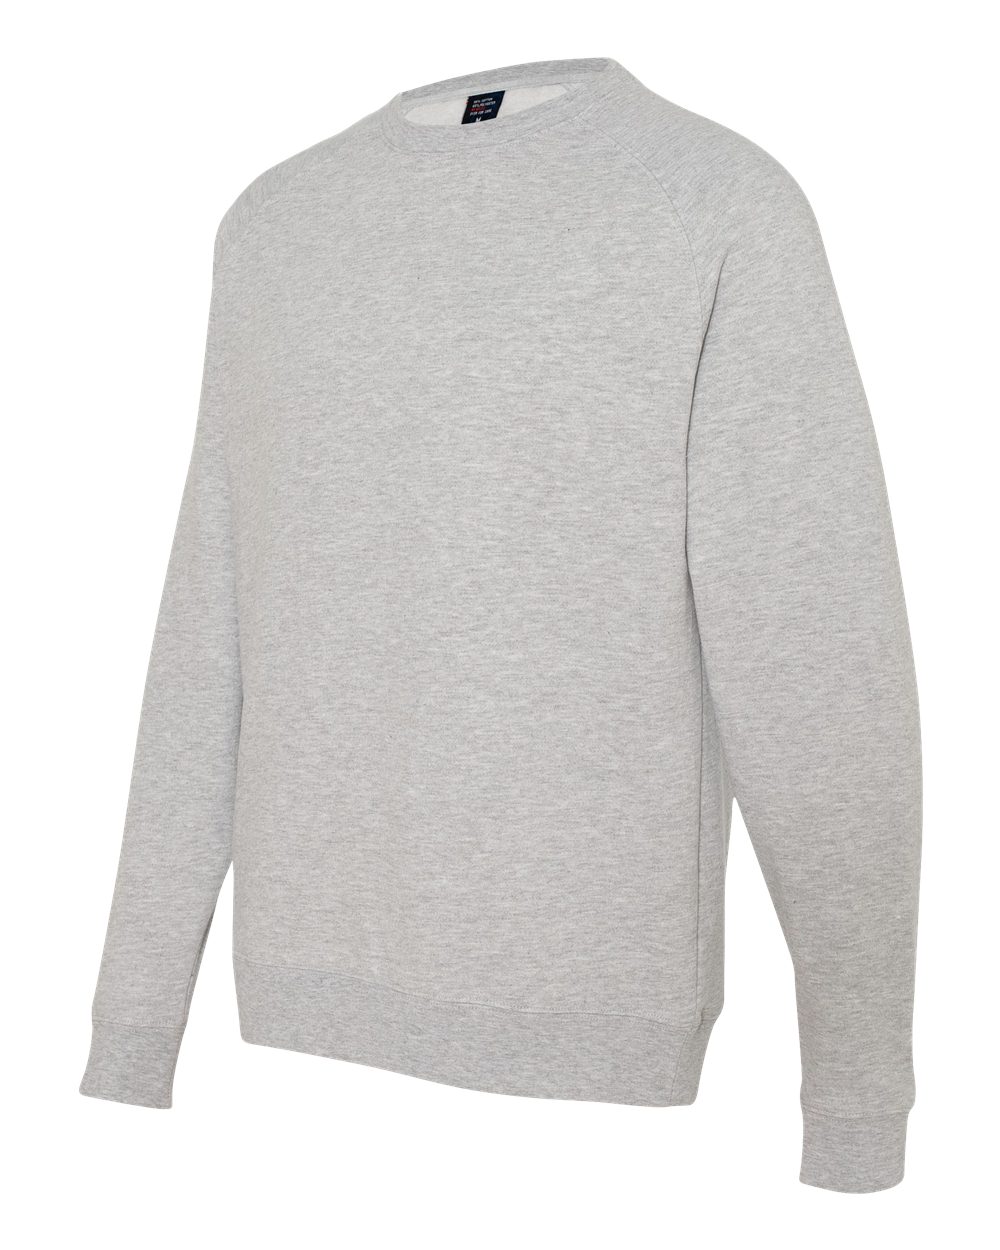 Independent Trading Co. Fitted Raglan Crewneck Sweatshirt - IND30RC